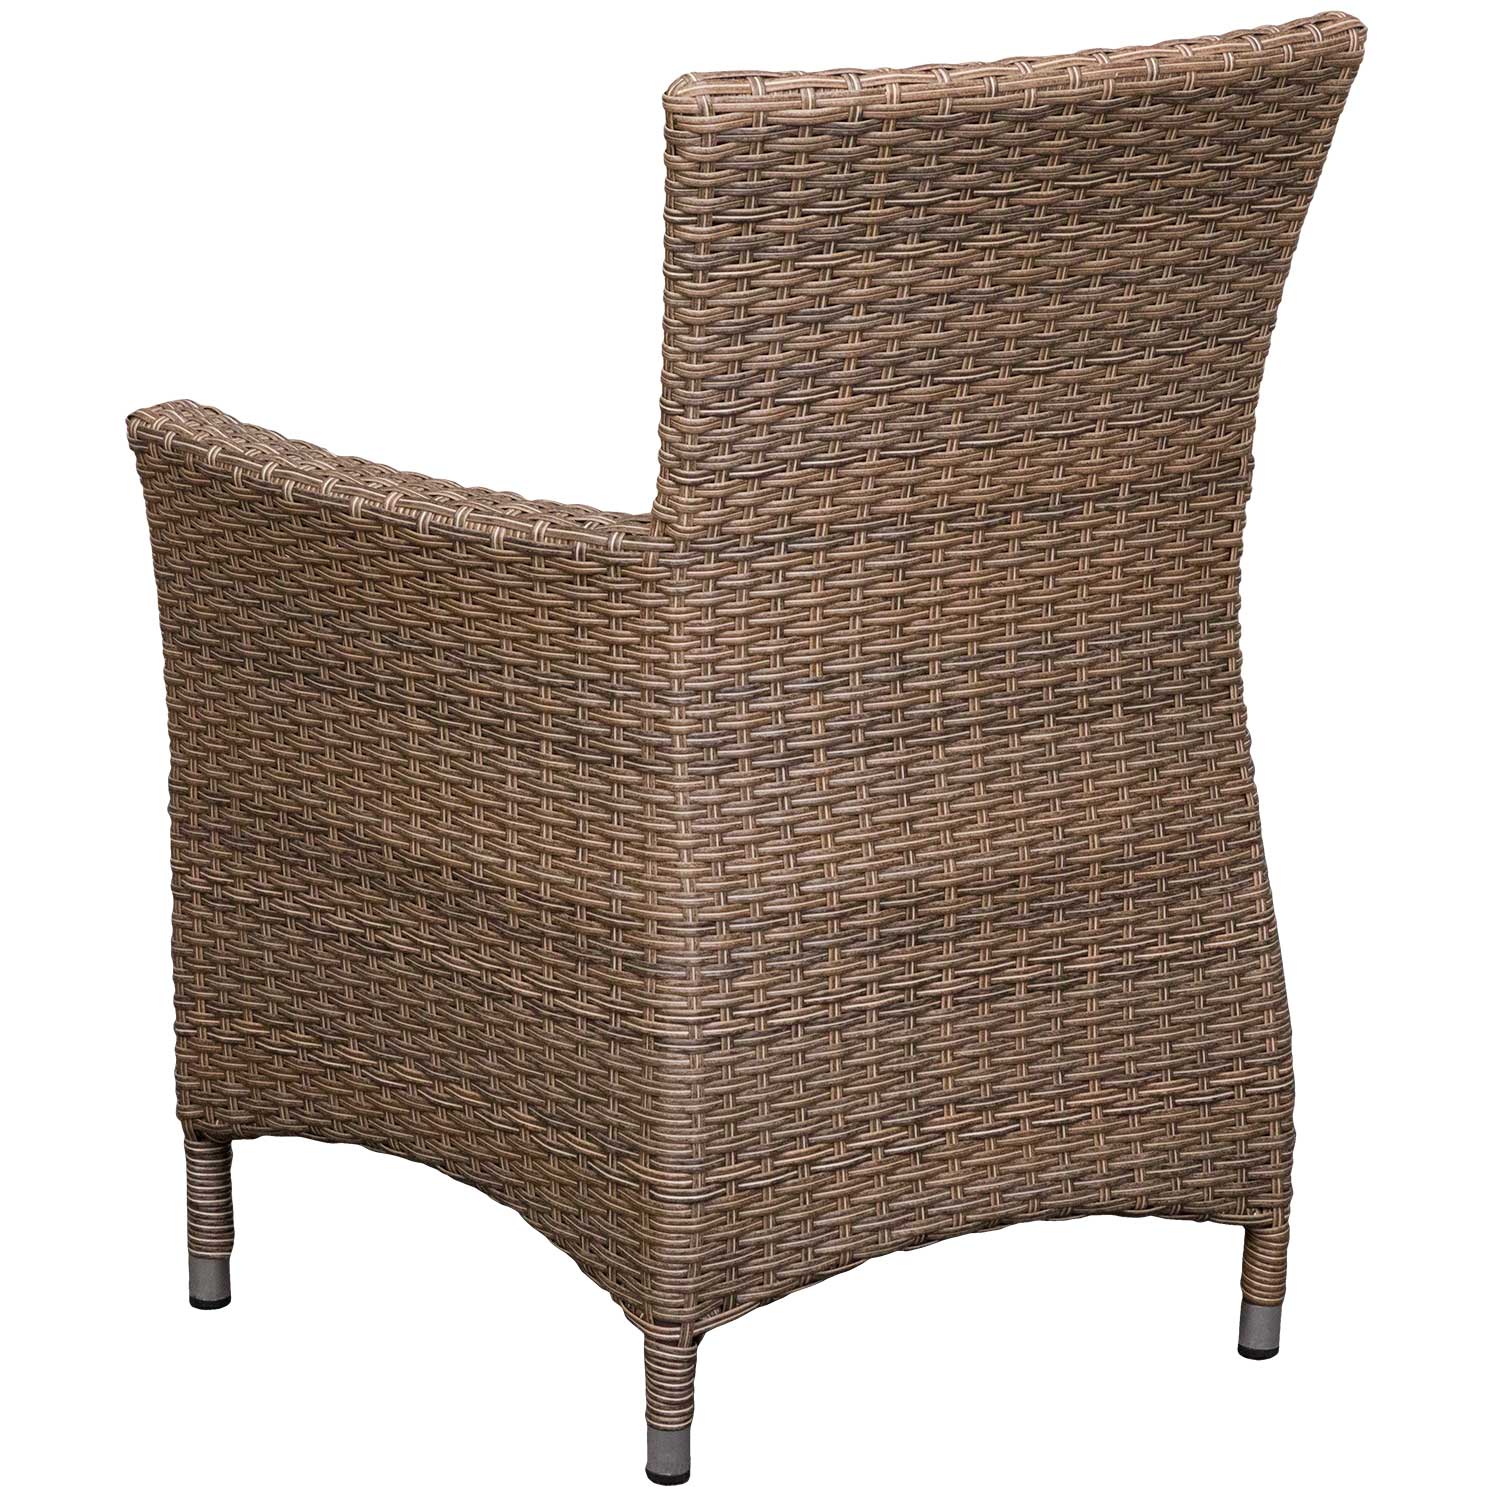 Outdoor Occasional Chair - Donut Chair - Osier Belle